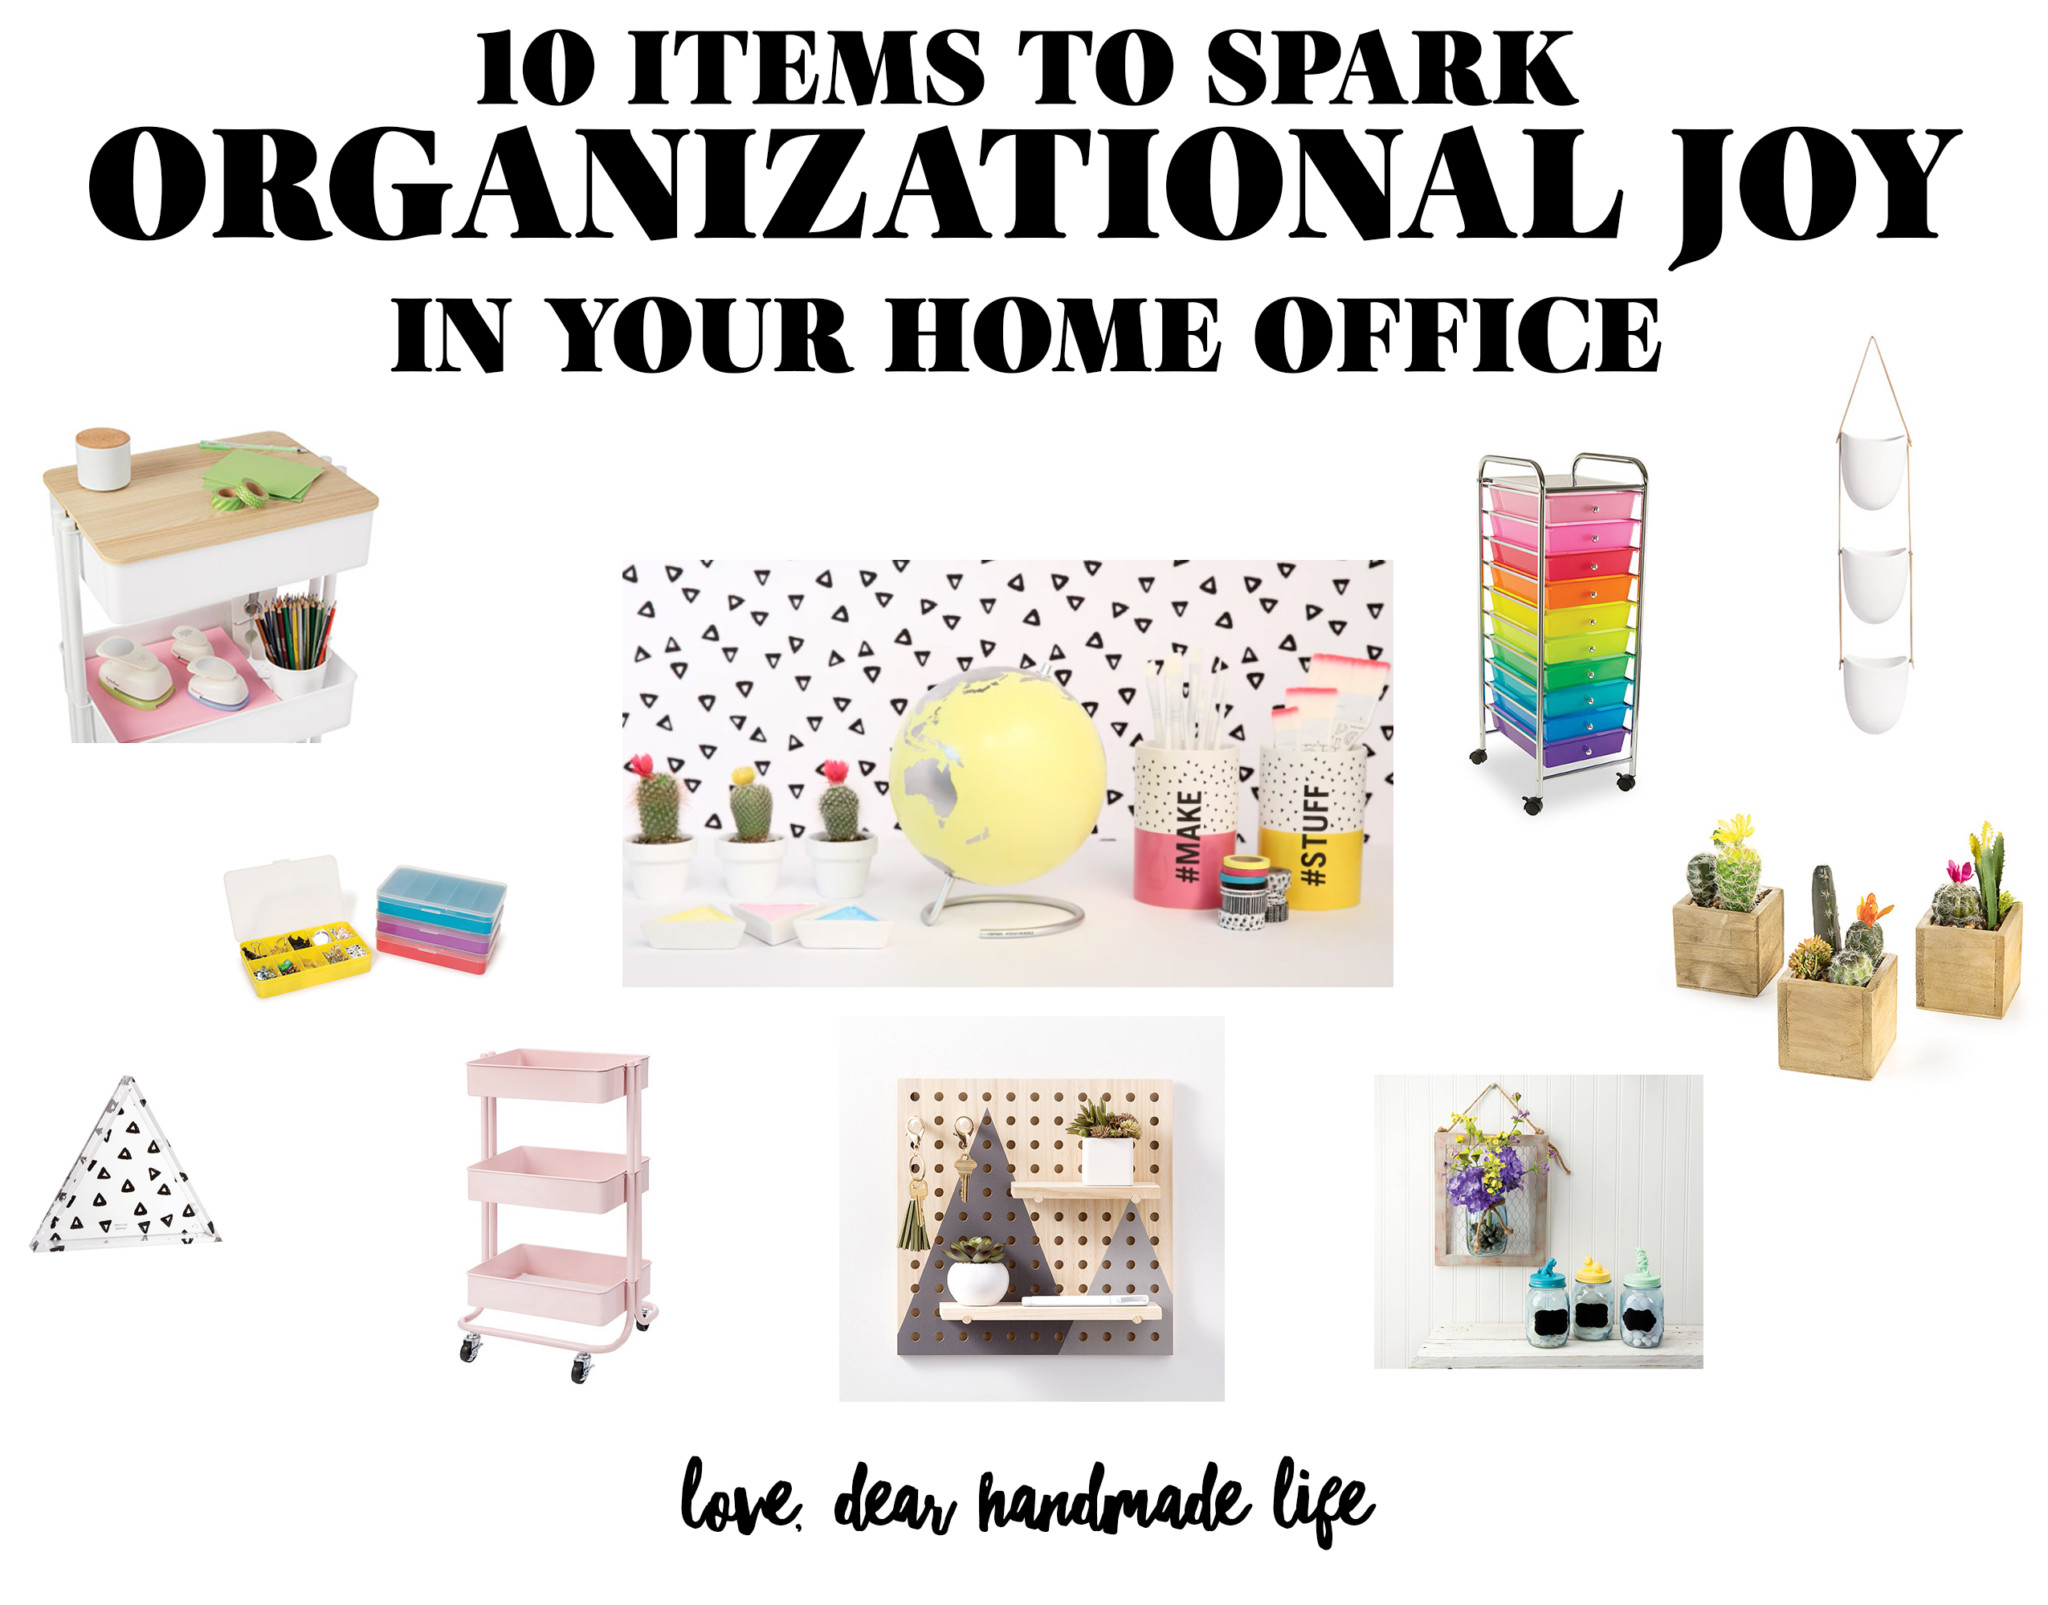 10 Items to Spark Organizational Joy in Your Home Office